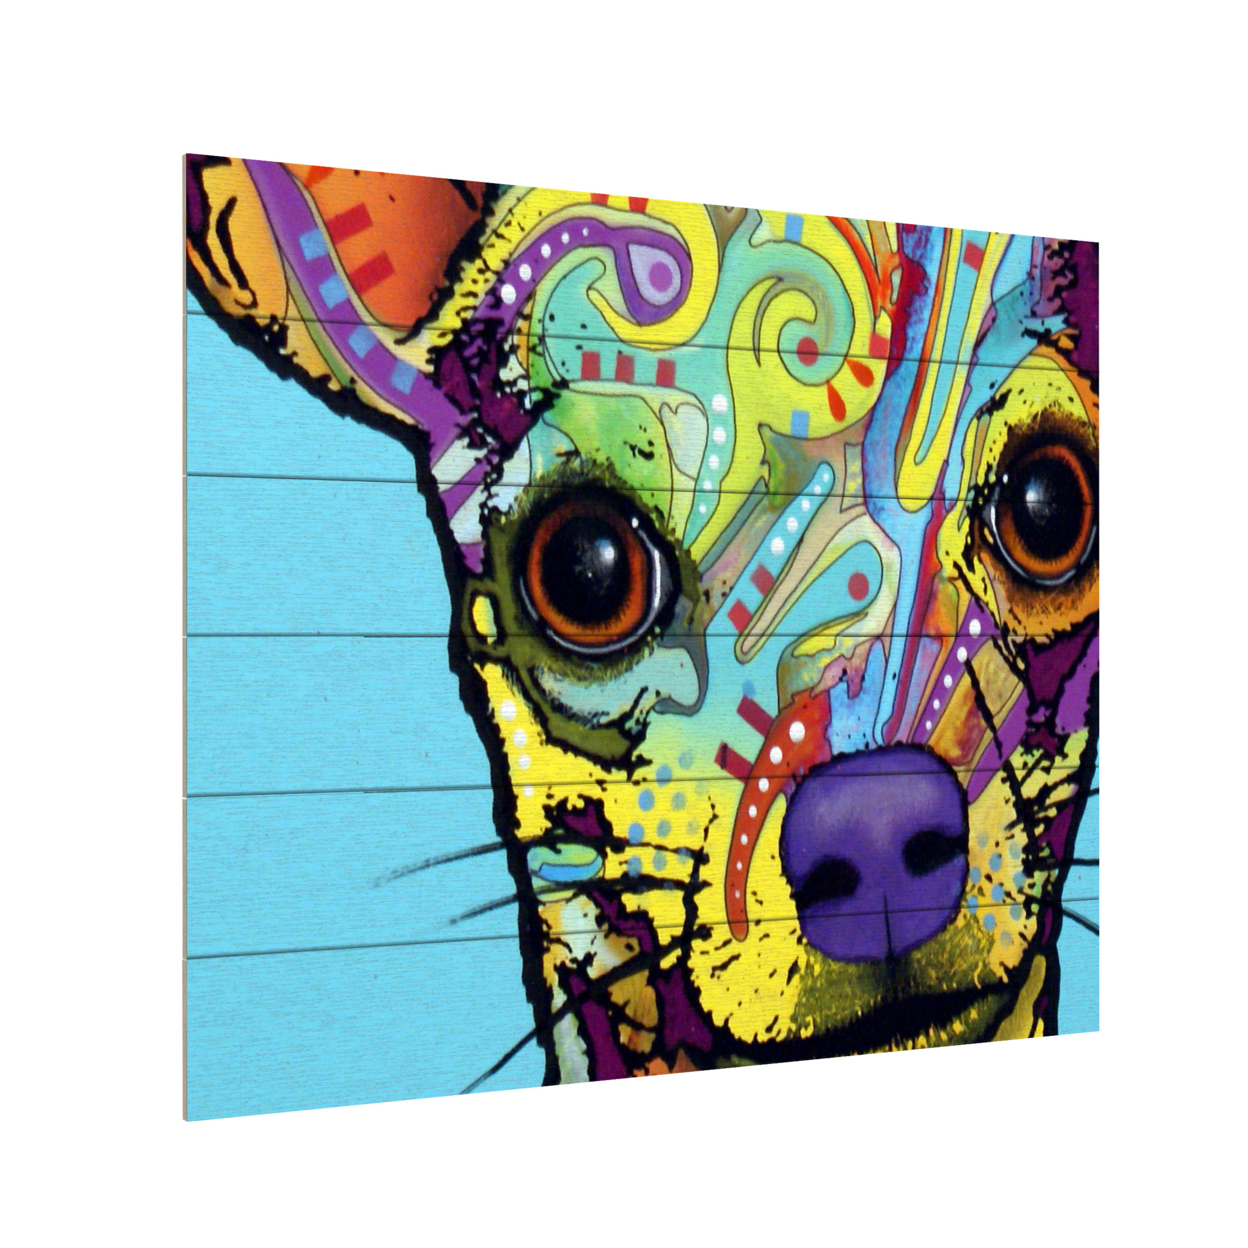 Wooden Slat Art 18 X 22 Inches Titled Chihuahua Ready To Hang Home Decor Picture